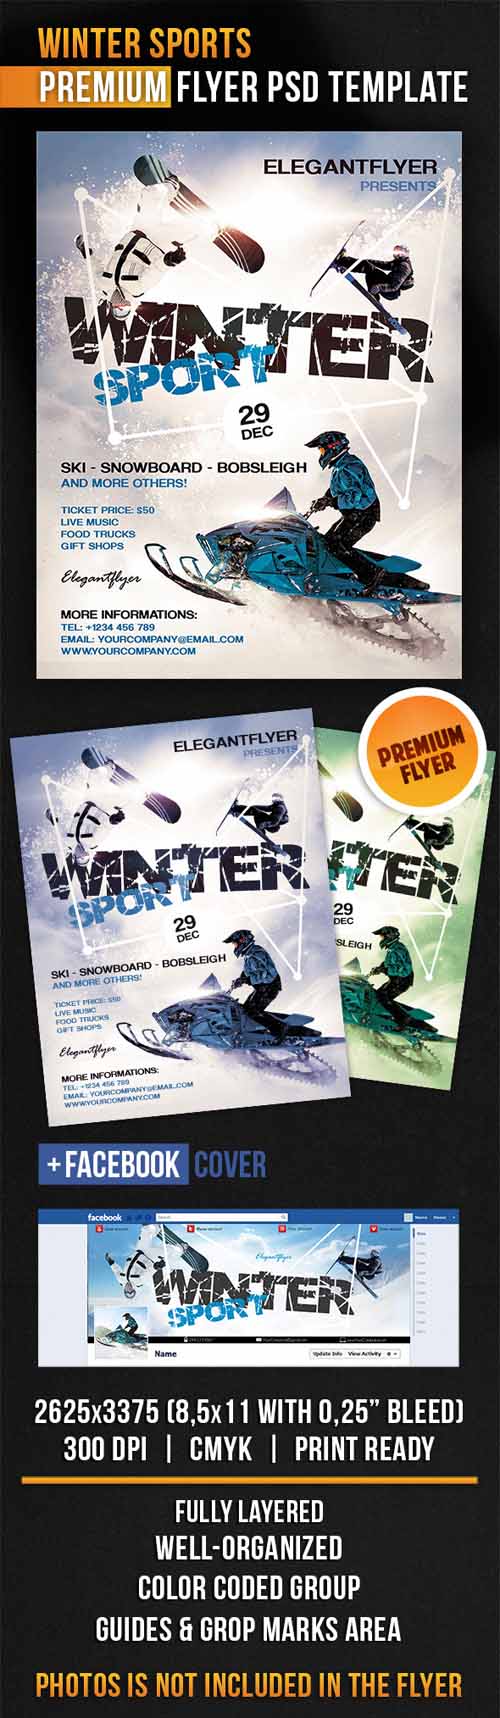 Flyer PSD Template - Winter Sports + Facebook Cover 4